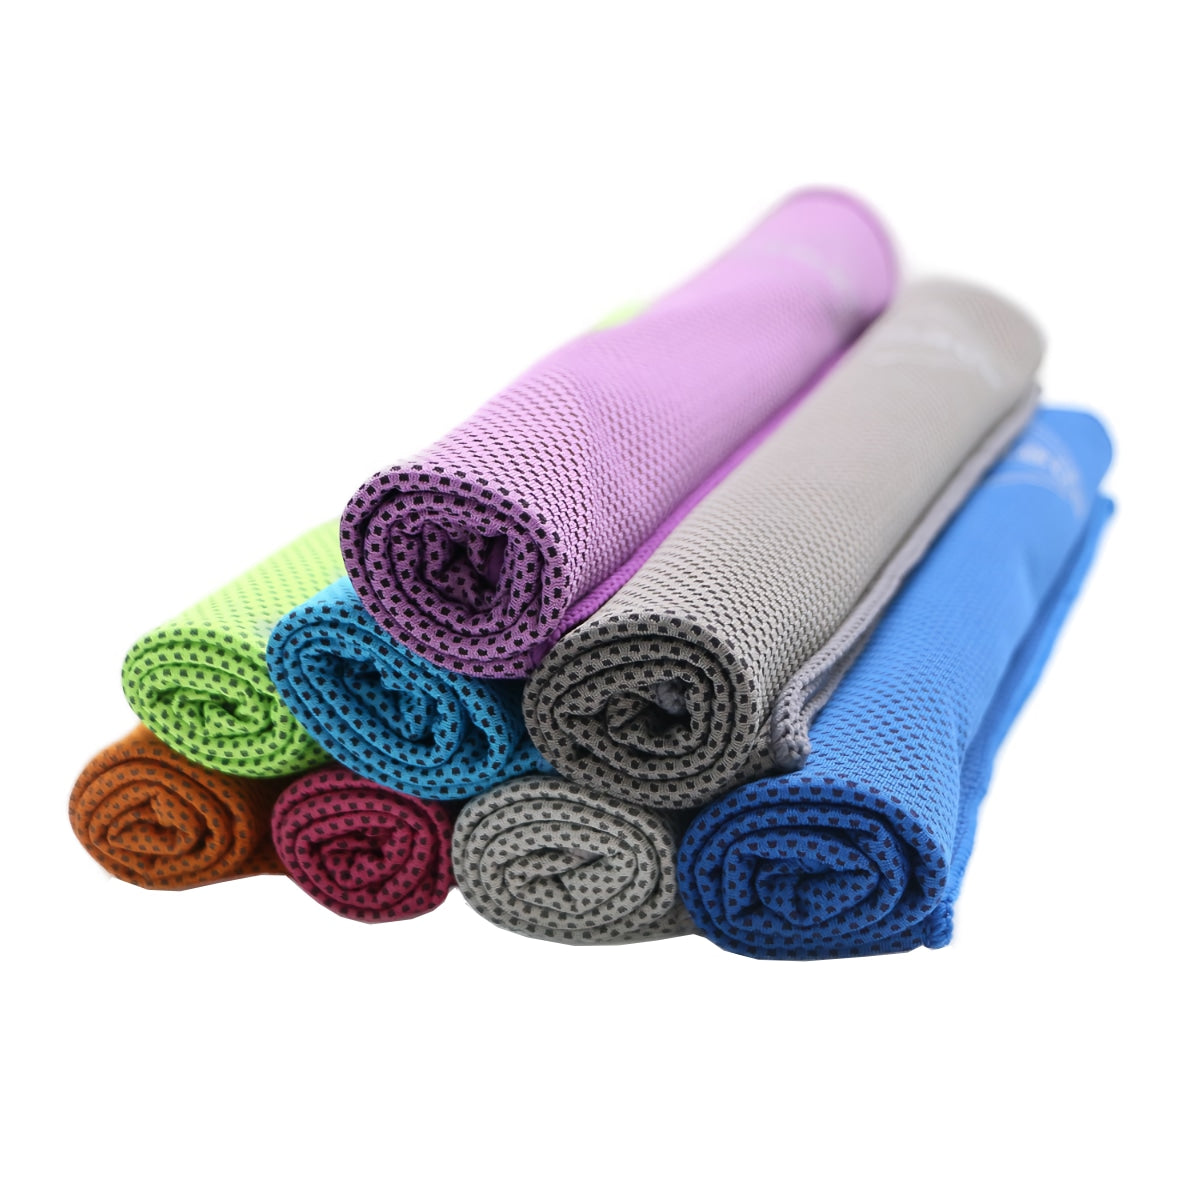 Cooling Towel, Sports Towel- Chilly Towel is Your Perfect Solution